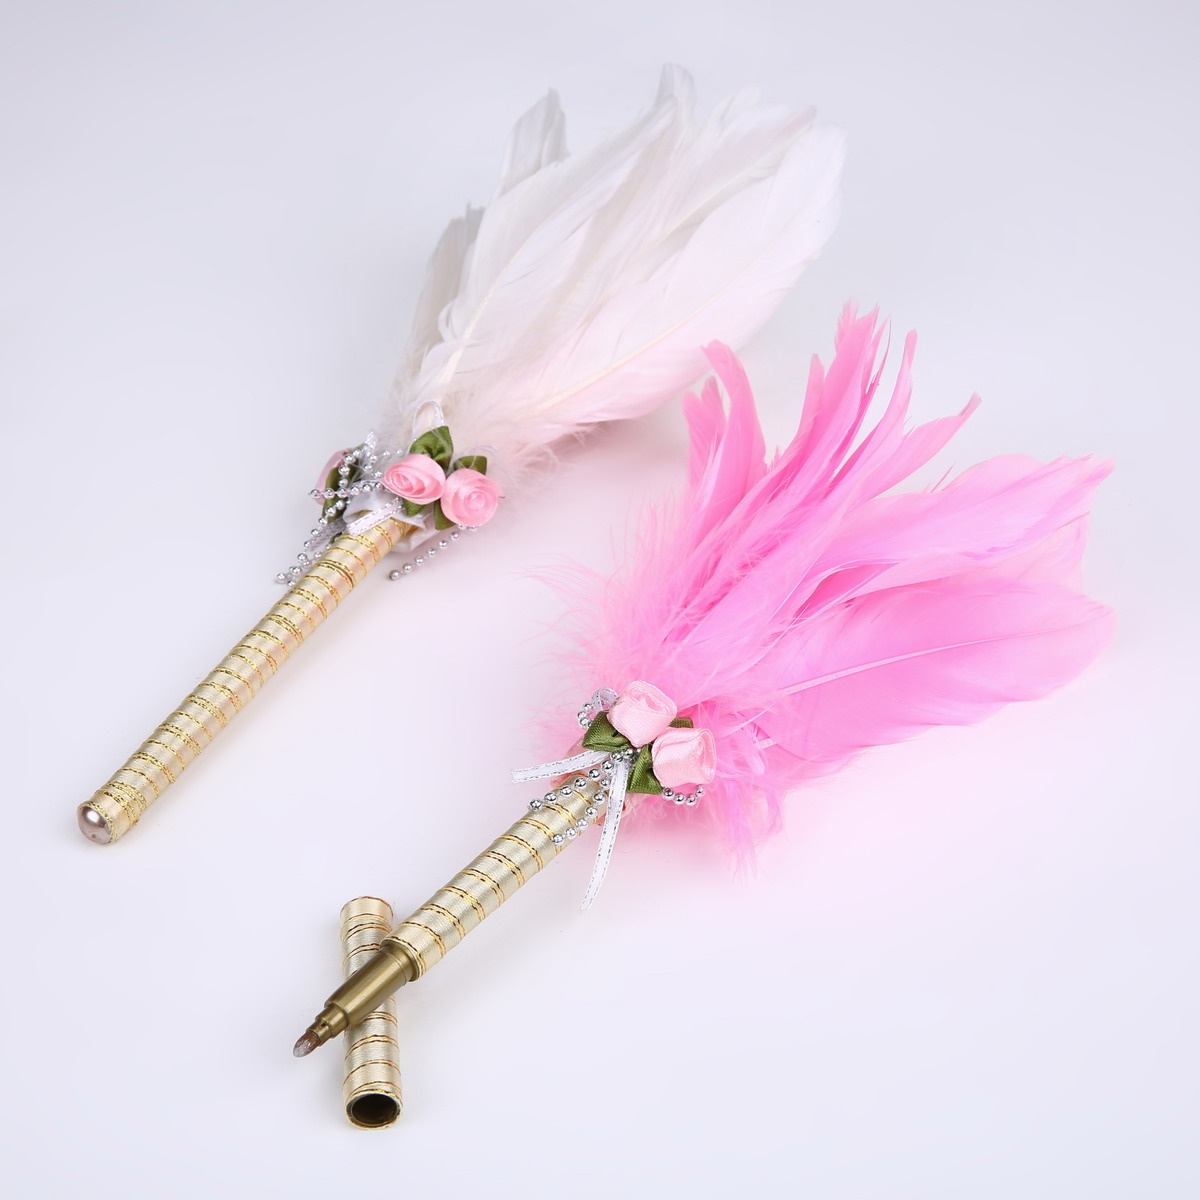 Unique pink feathers top ball pen with elegance design for wedding/advertisement gift